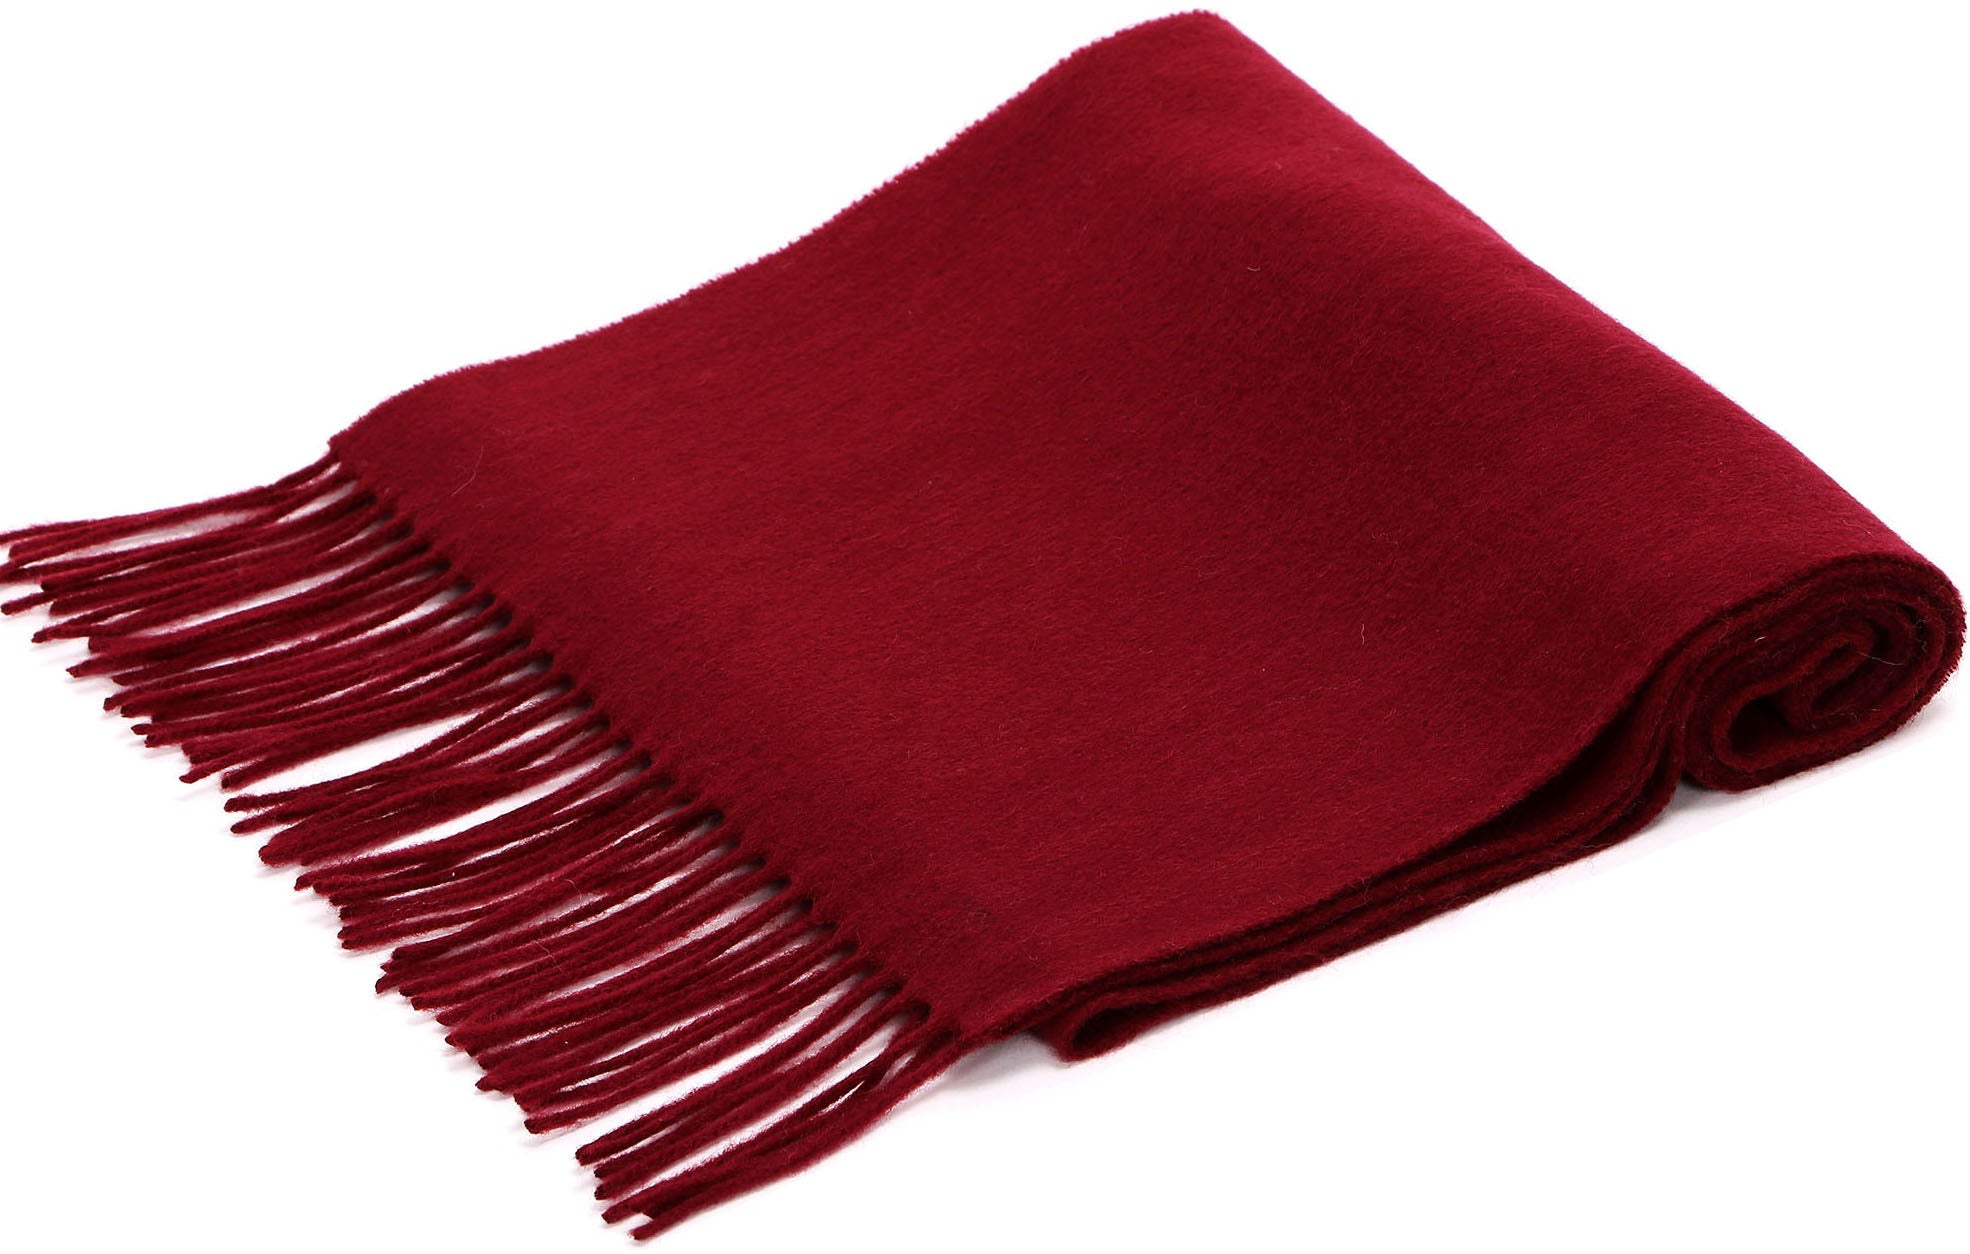 1pc Ladies' Solid Color Faux Cashmere Scarf, Winter Warm Shawl Suitable For  Office Shawl, Daily Wear